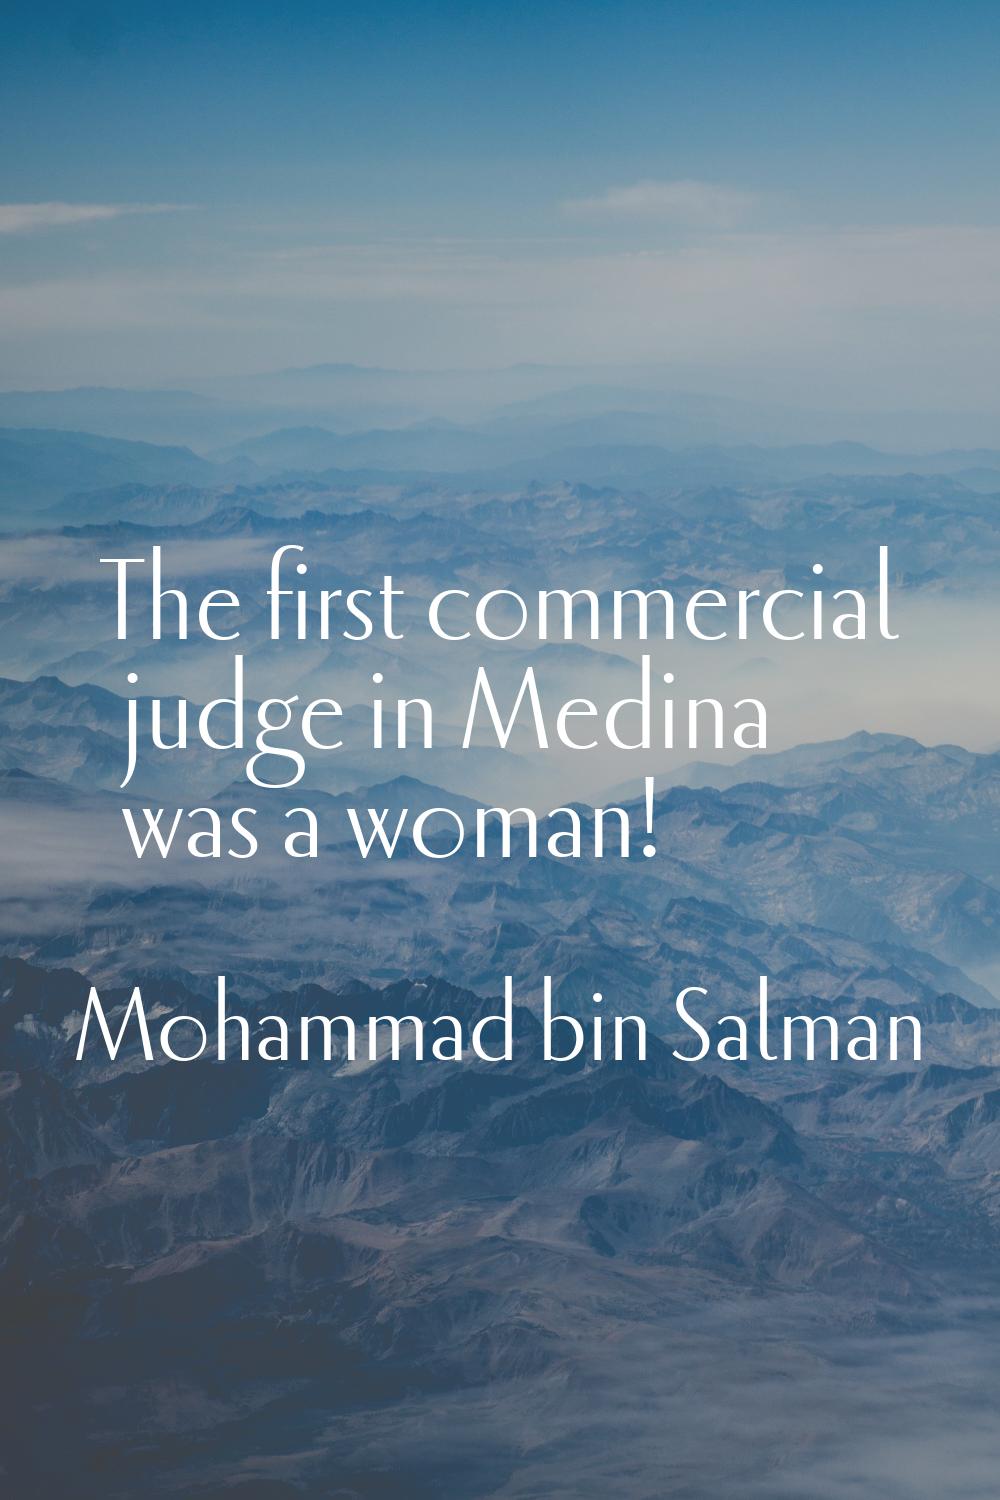 The first commercial judge in Medina was a woman!